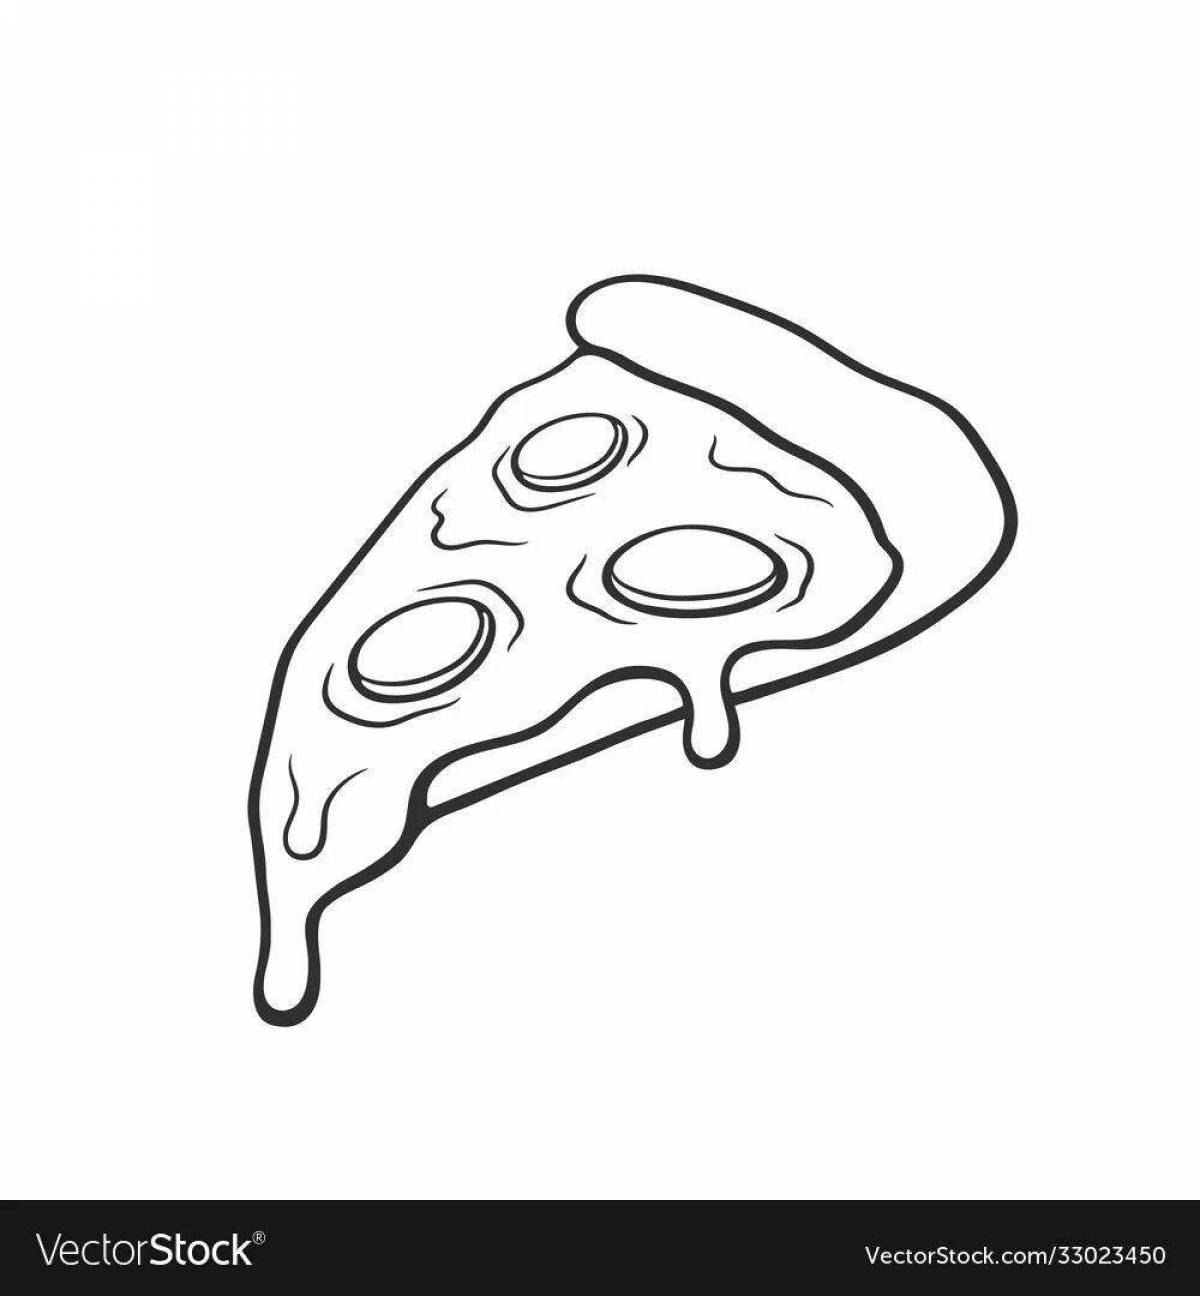 Ambrosial pizza slice coloring page